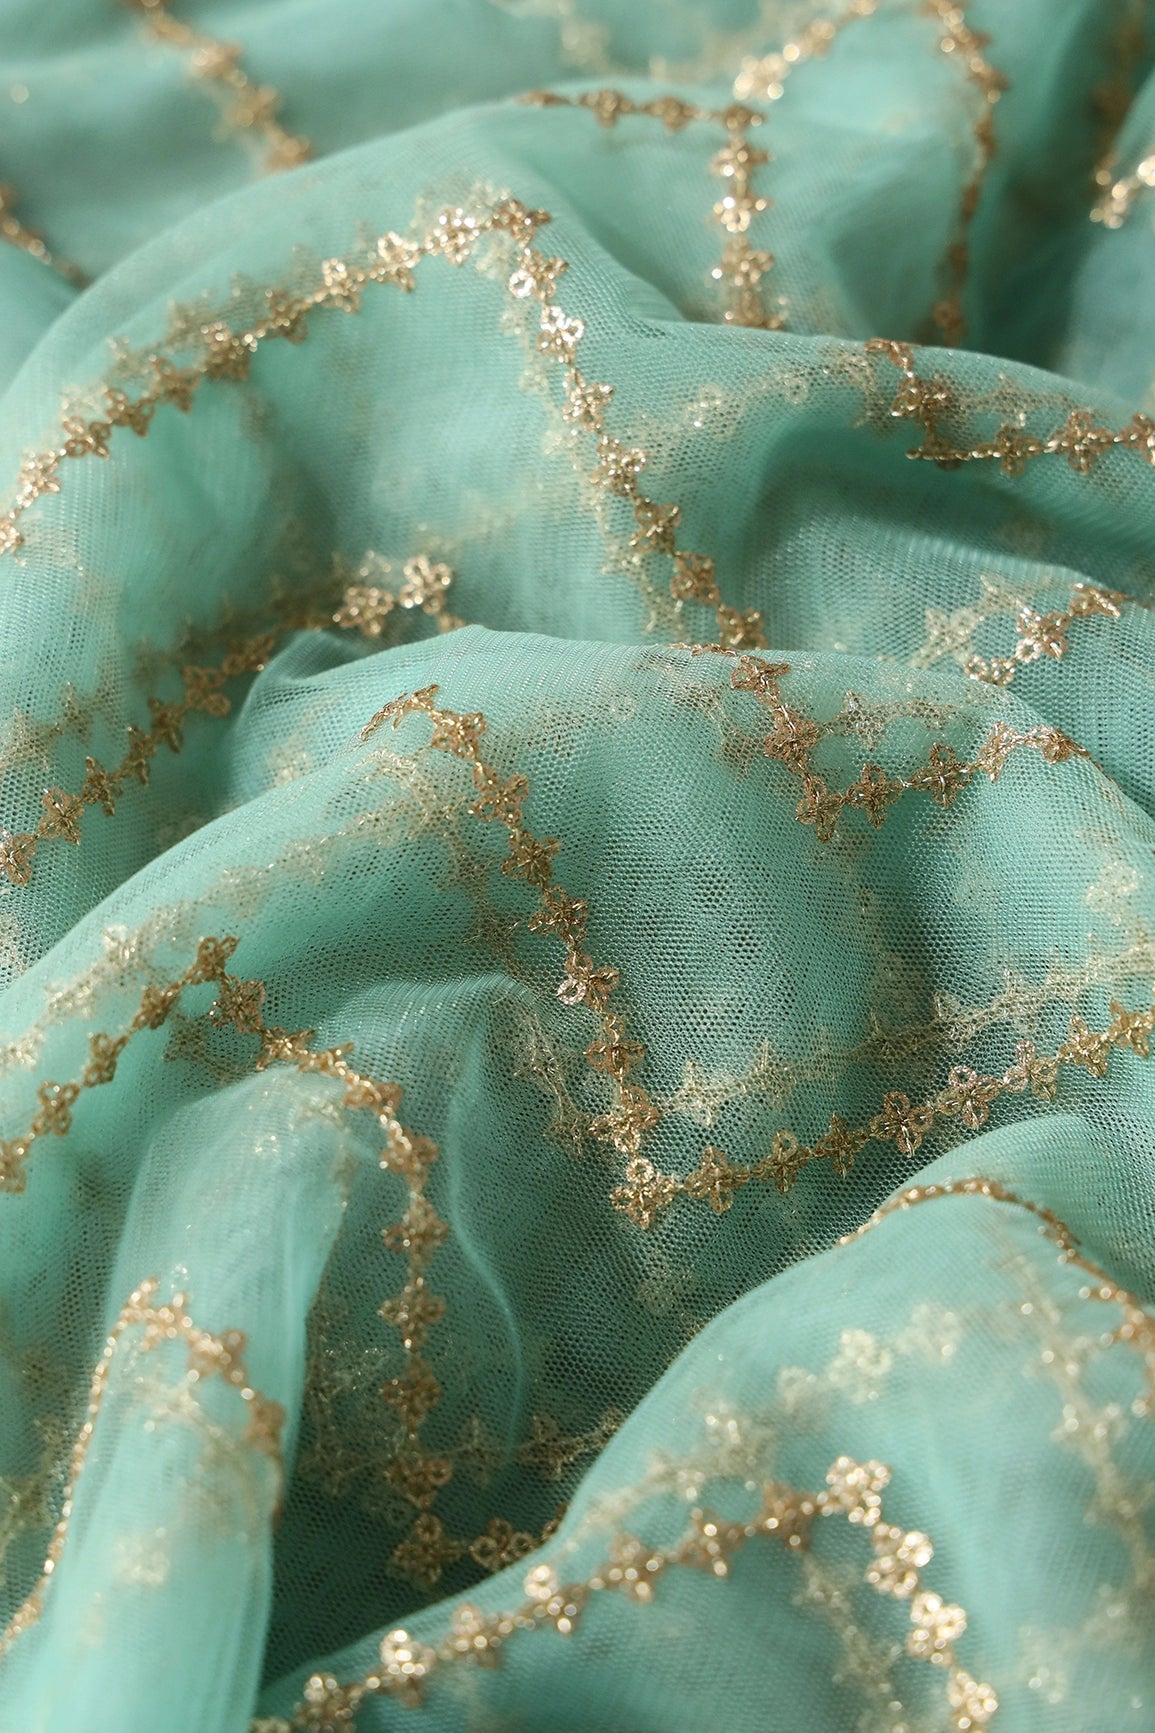 2 Meter Cut Piece Of Gold Sequins Chevron Embroidery On Teal Soft Net Fabric - doeraa